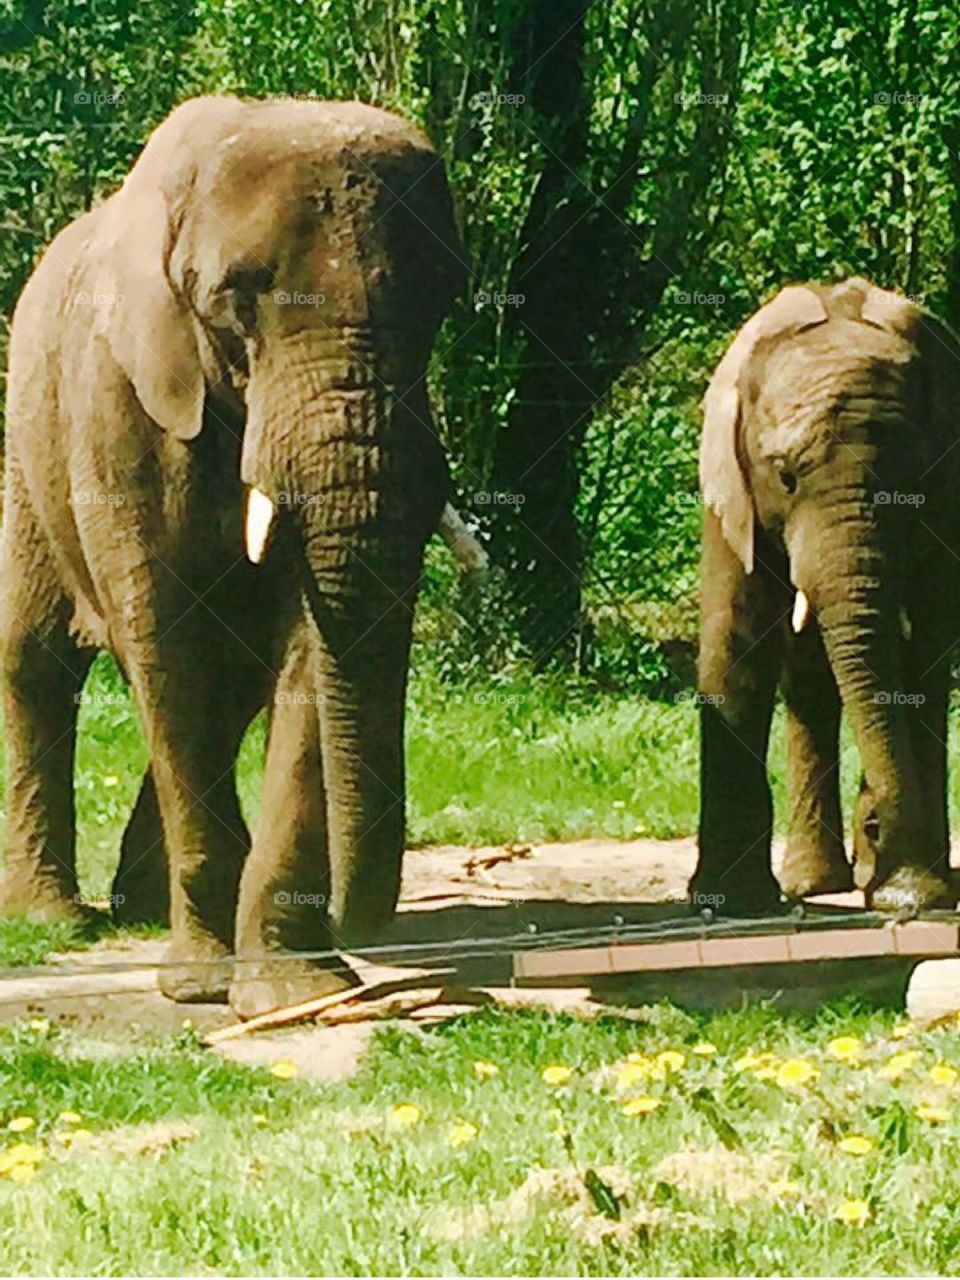 2 Elephants drinking at a safari close up green background in the wild nature